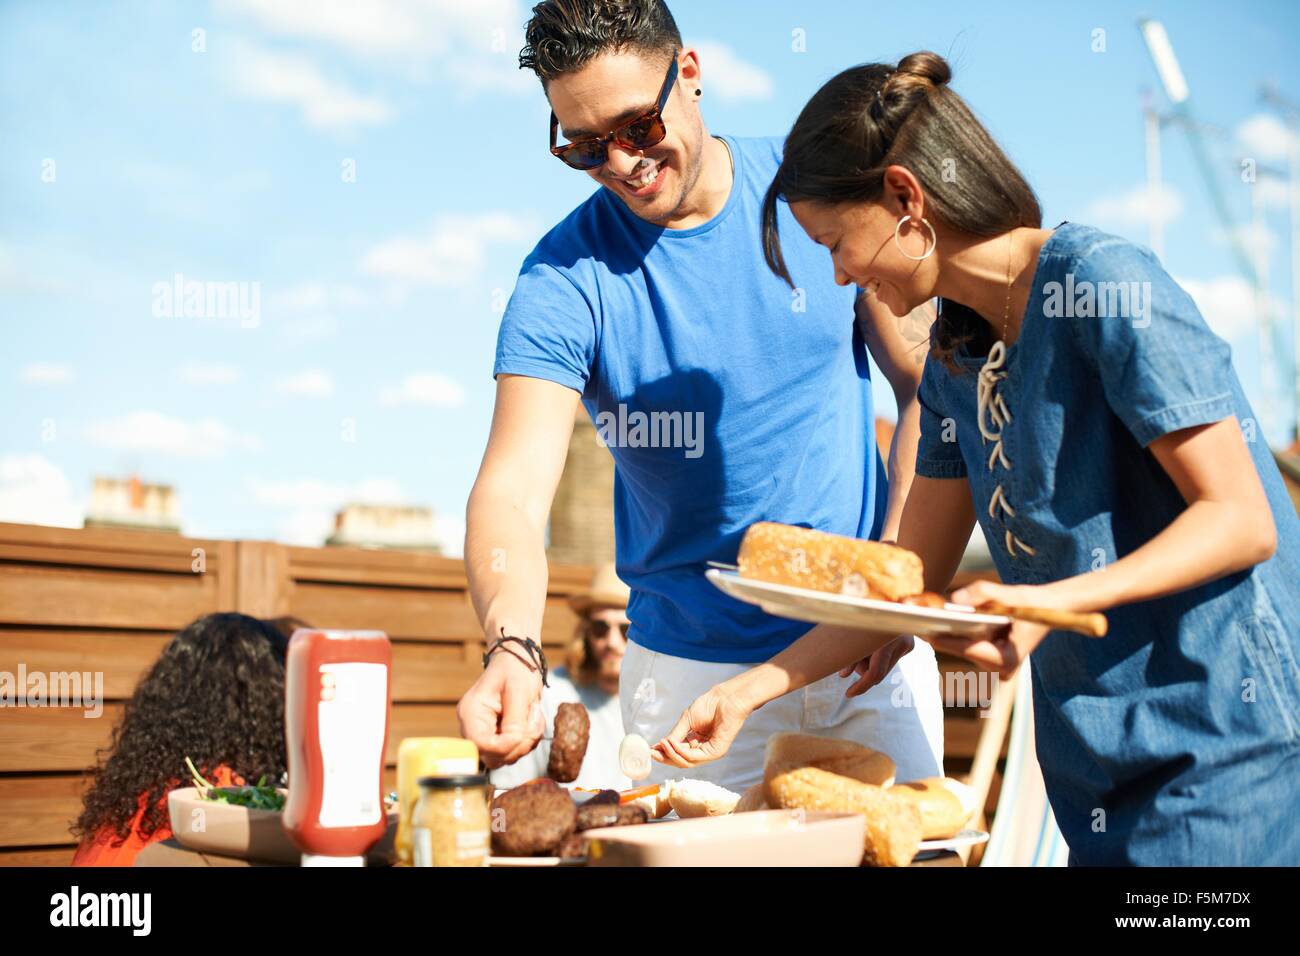 Mid adult woman selecting food at rooftop party Stock Photo